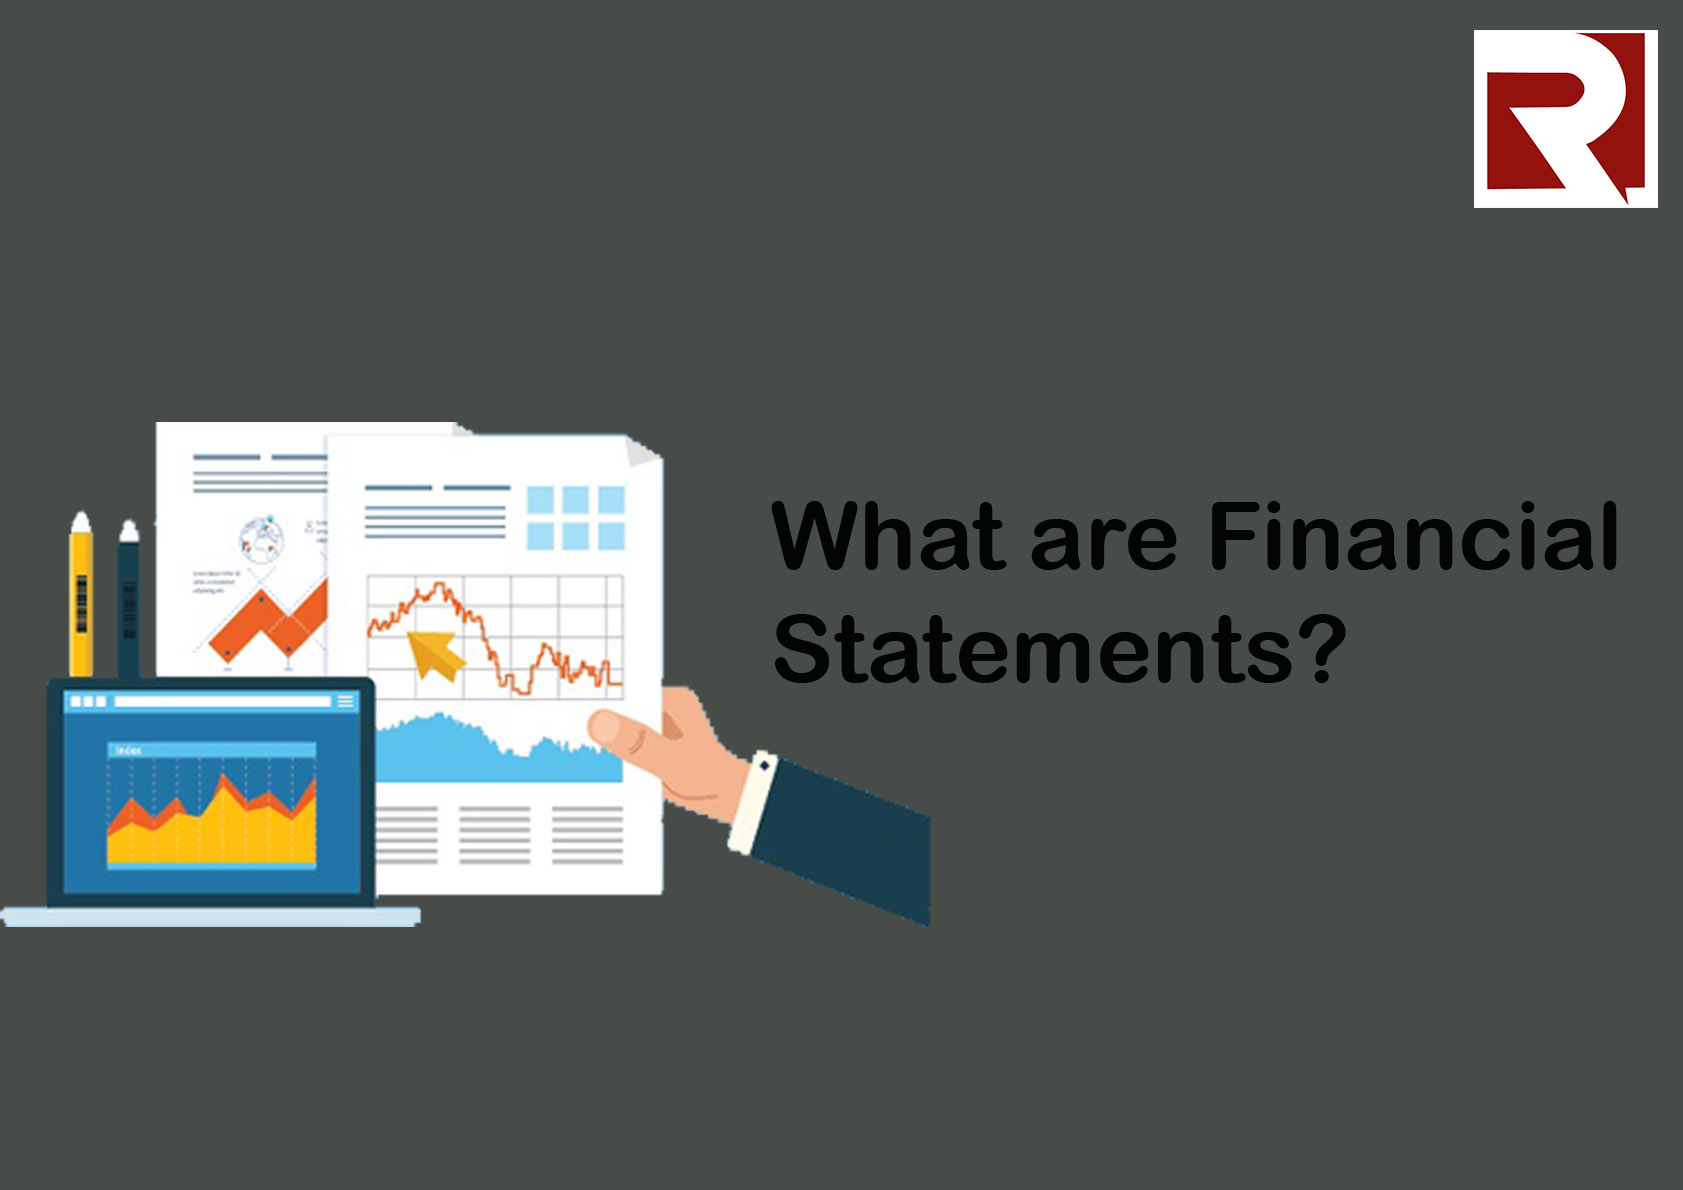 What are Financial Statements?